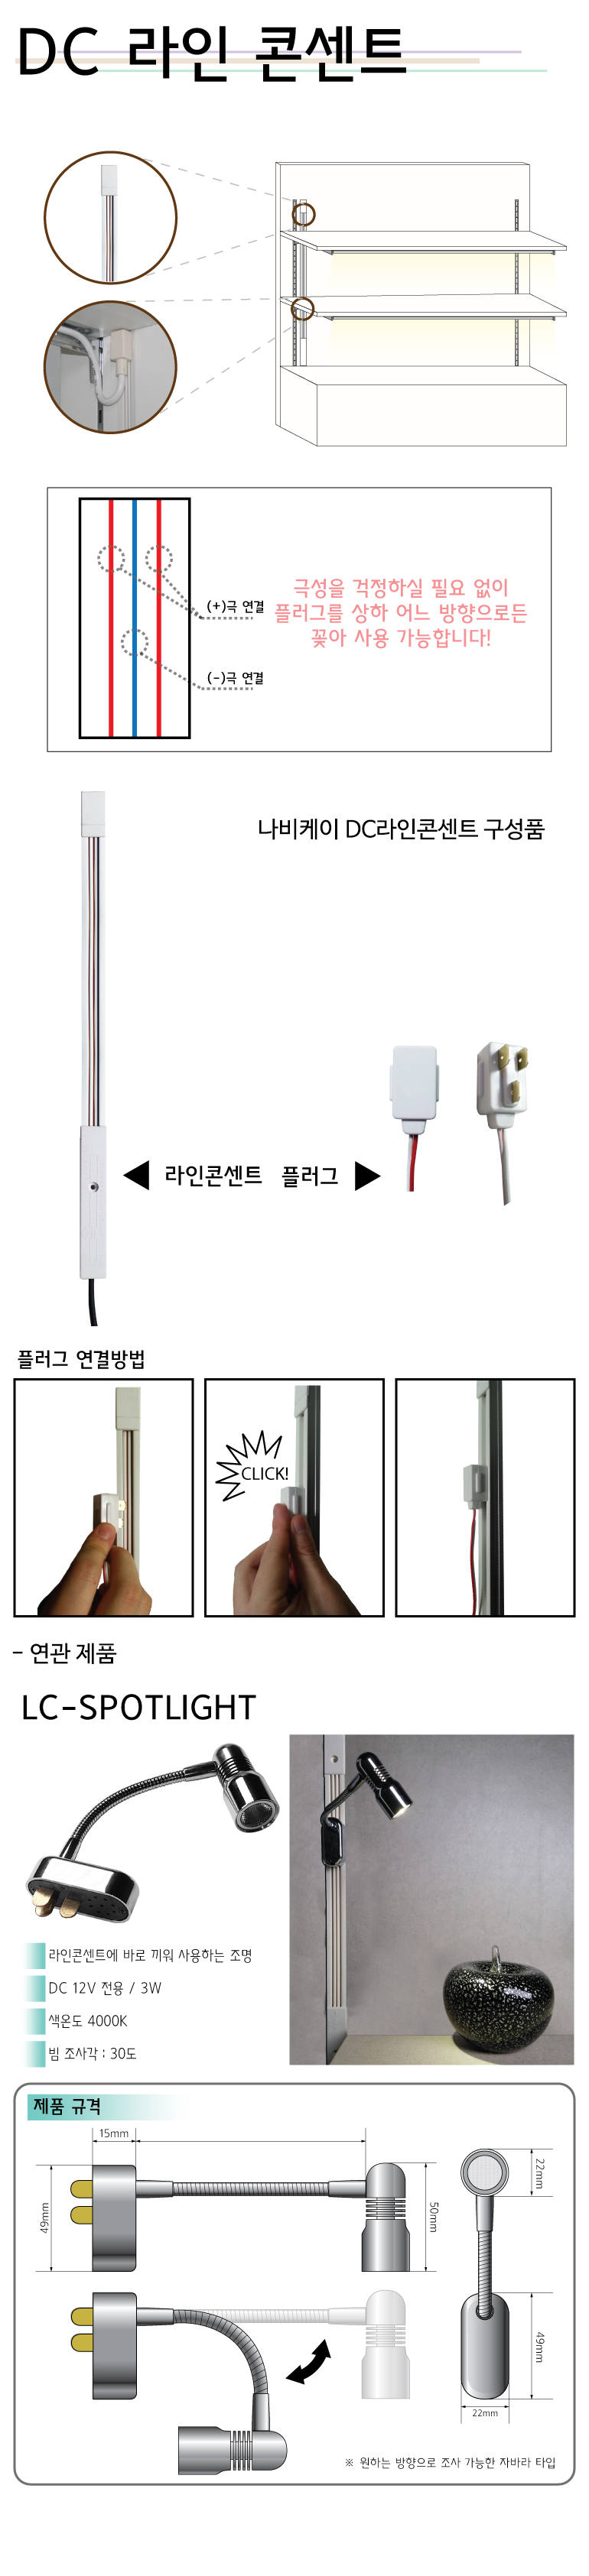 Linear Outlet_DC Type